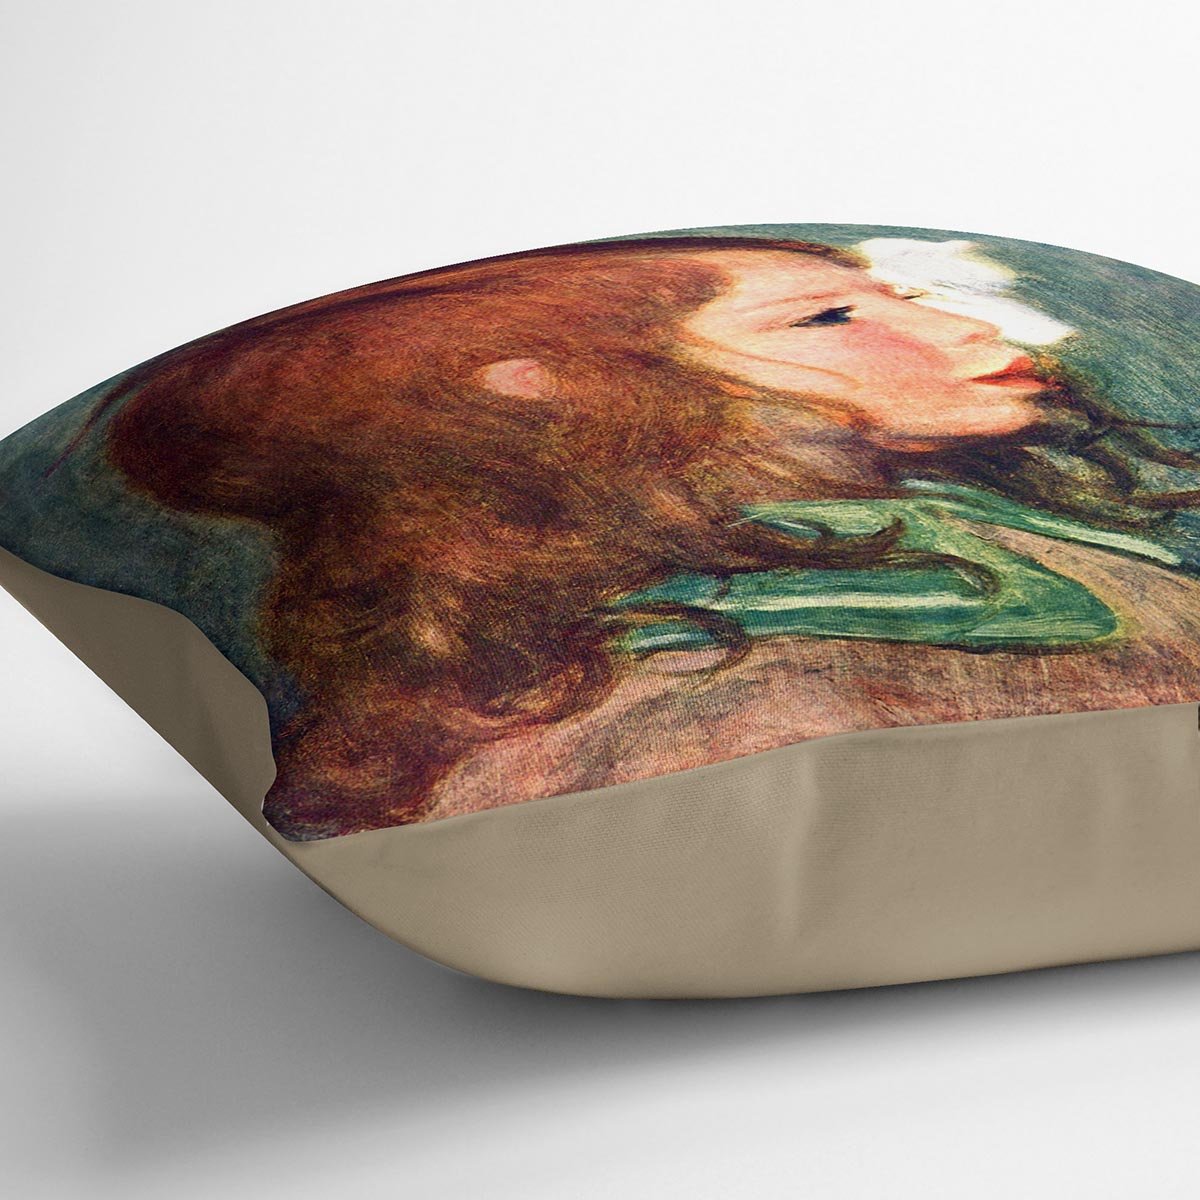 Portrait of Coco by Renoir Throw Pillow